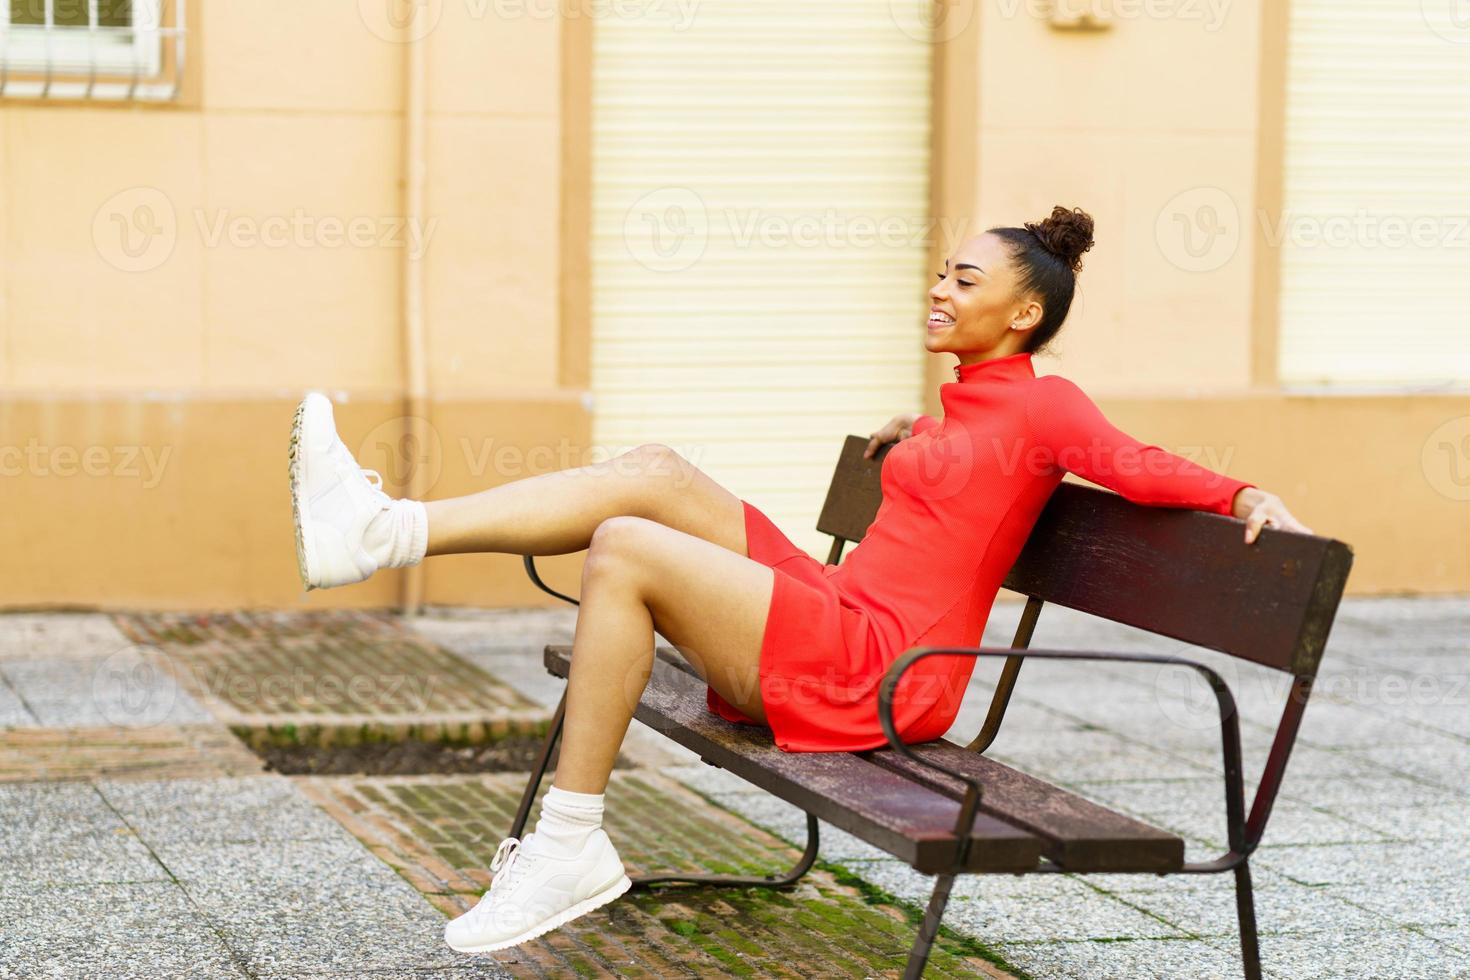 https://static.vecteezy.com/system/resources/previews/005/885/578/non_2x/happy-mixed-woman-moving-her-legs-in-joy-sitting-on-a-bench-in-the-street-photo.jpg